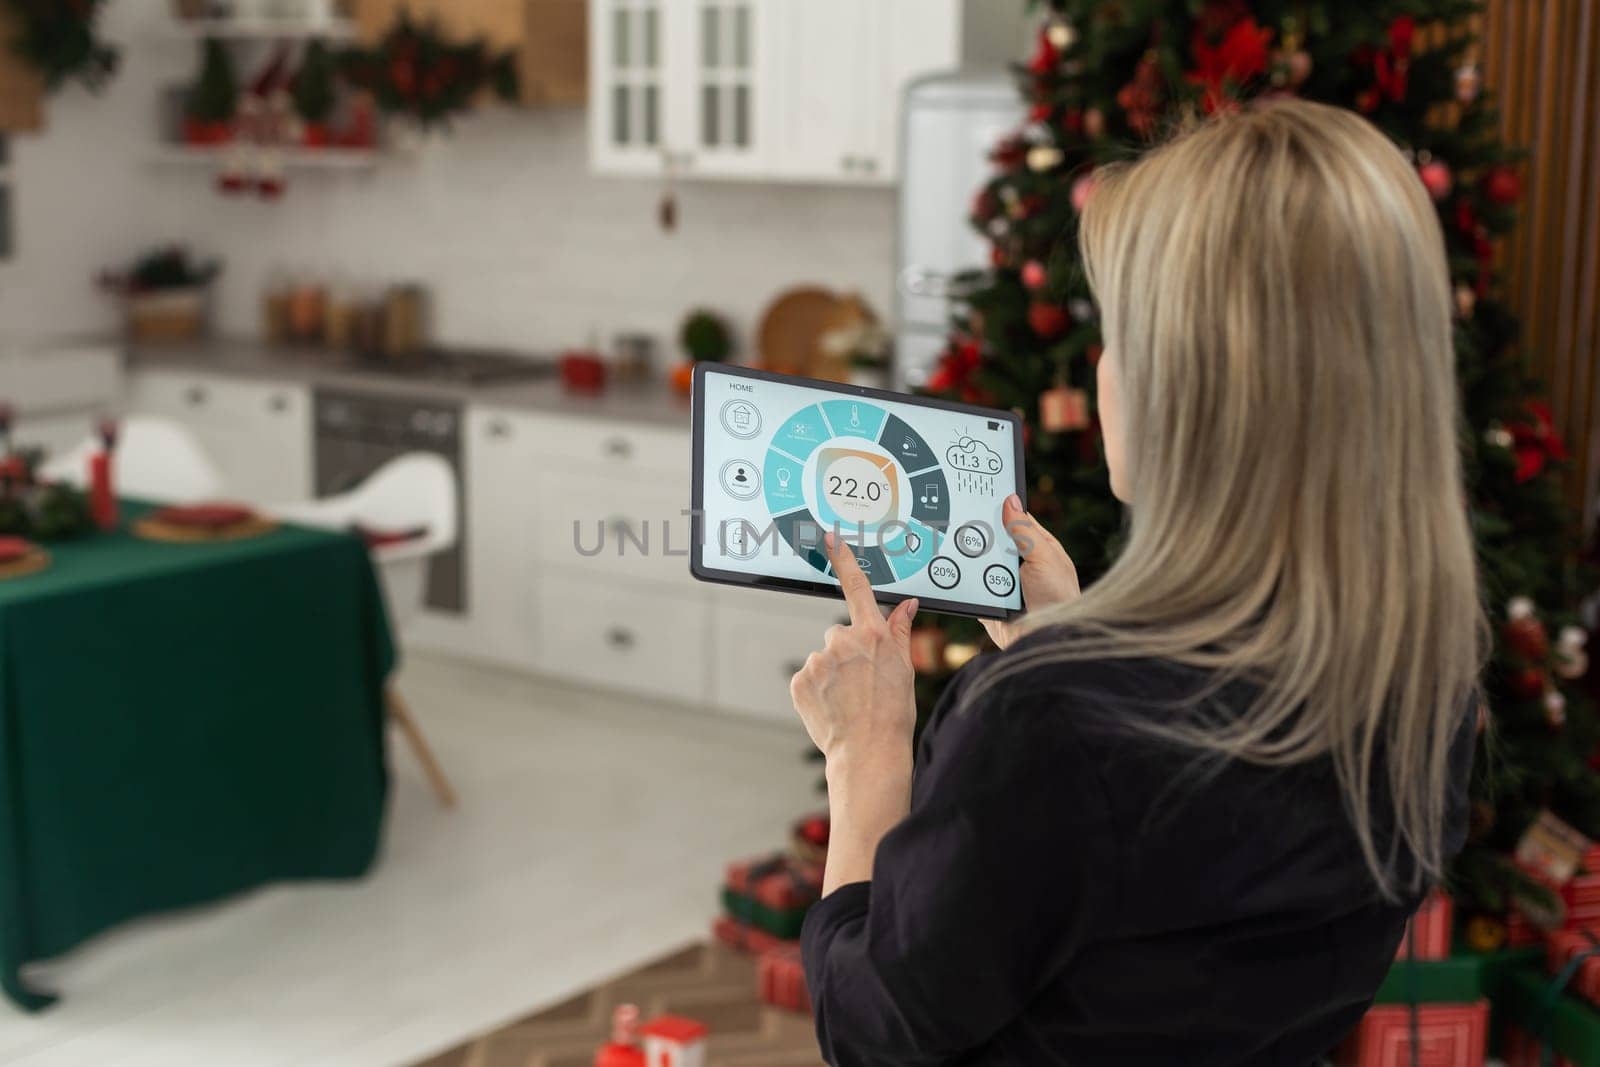 Woman pushing button on kitchen app of smart home on digital tablet at home. Concept of modern home control. Idea of domestic lifestyle. Cropped image of girl. Blurred man on background using laptop